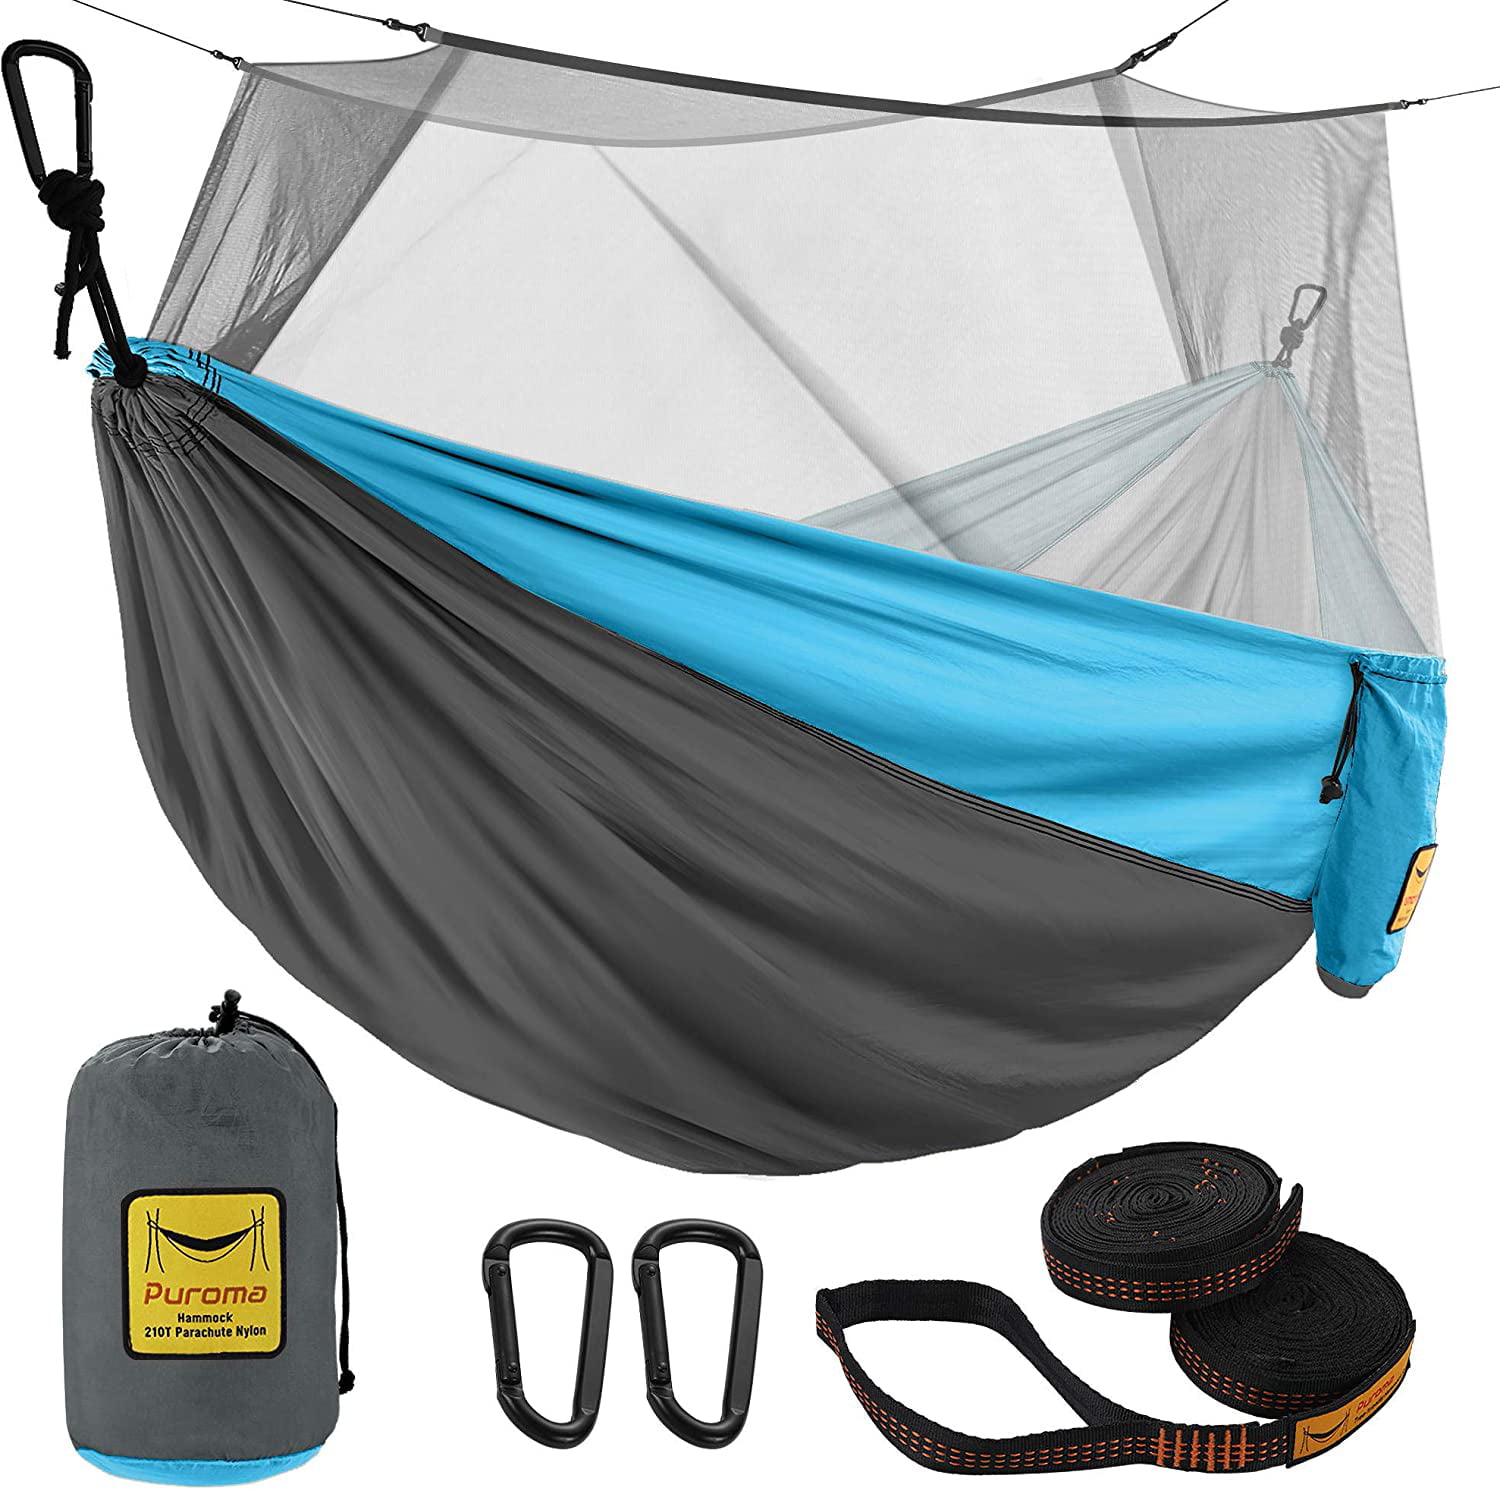 Camping Hammock,Single Portable Hammock Nylon Parachute with 2 Tree Straps,Ultra-Lightweight Suitable for Outdoor,Indoor,Camping,Hiking,Backpacking,Beach 